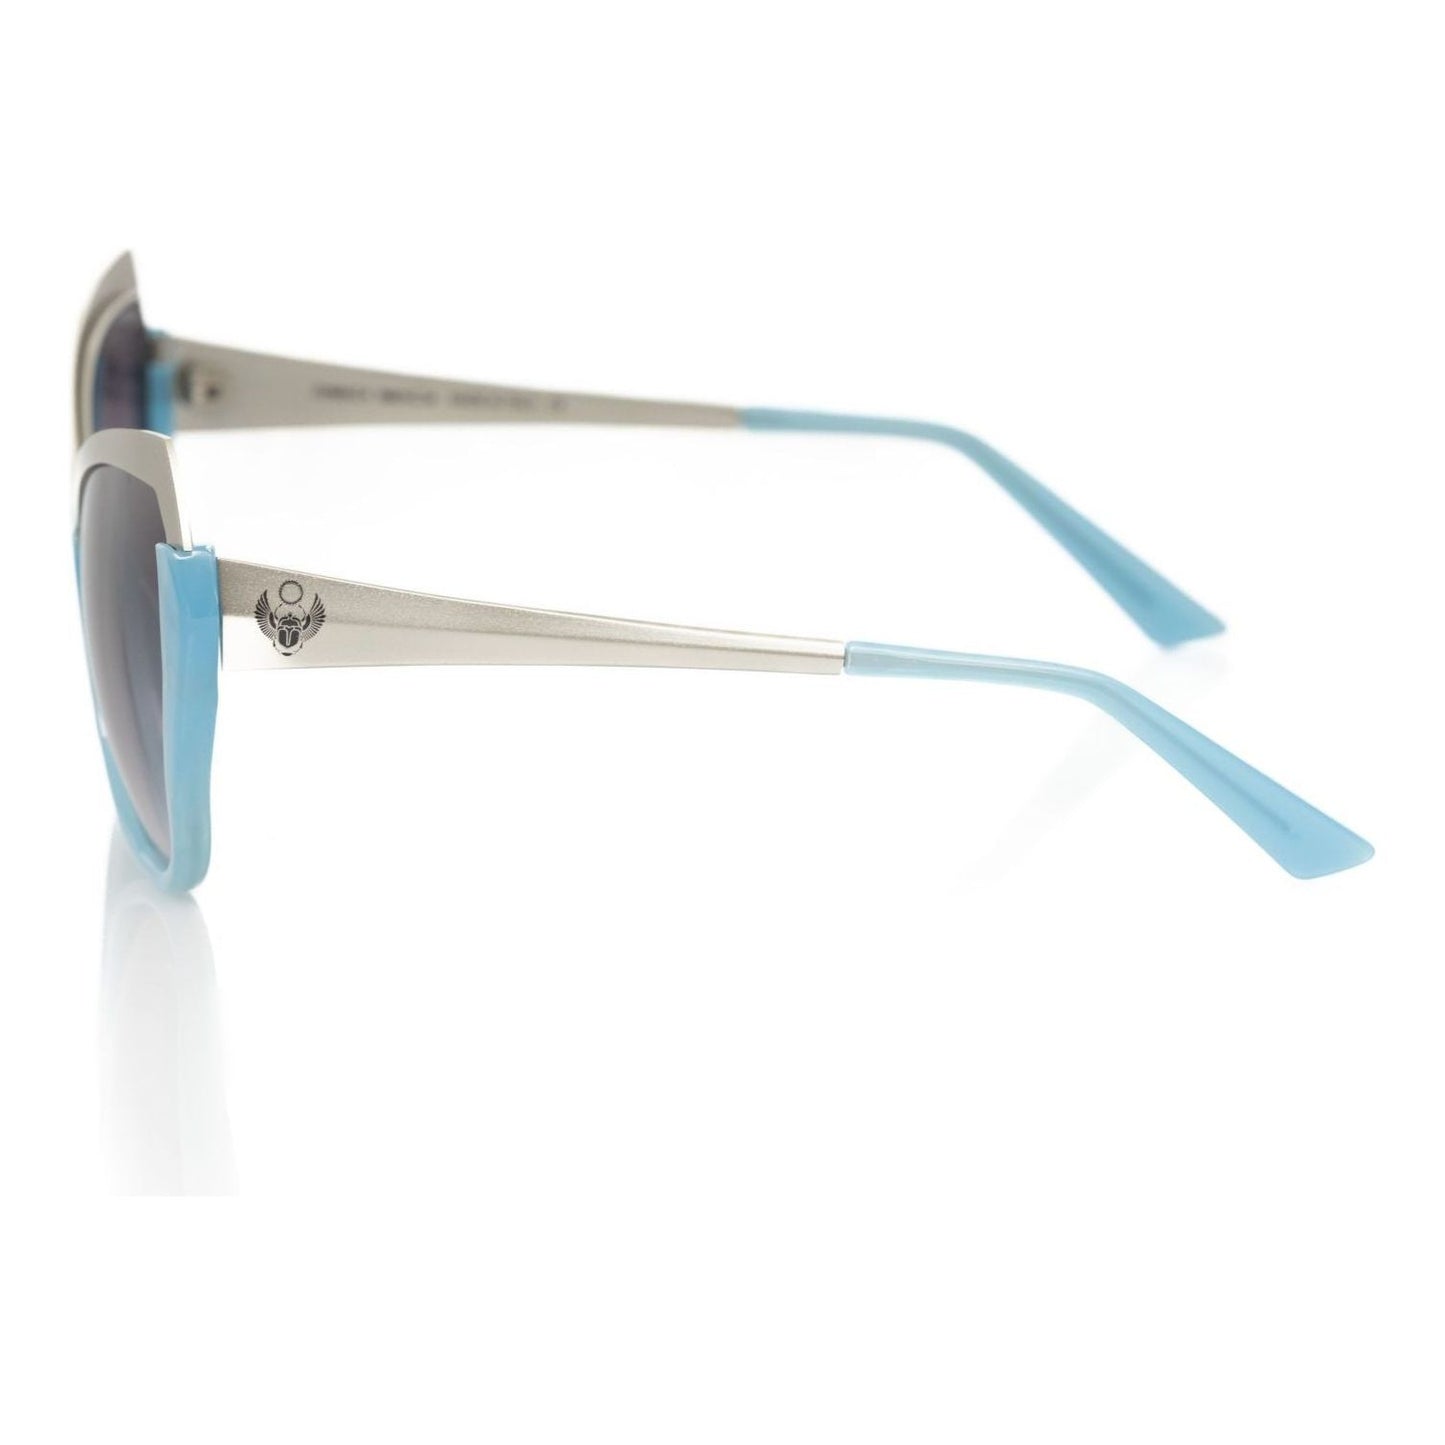 Frankie Morello Chic Cat Eye Shades with Metallic Accent light-blue-acetate-sunglasses